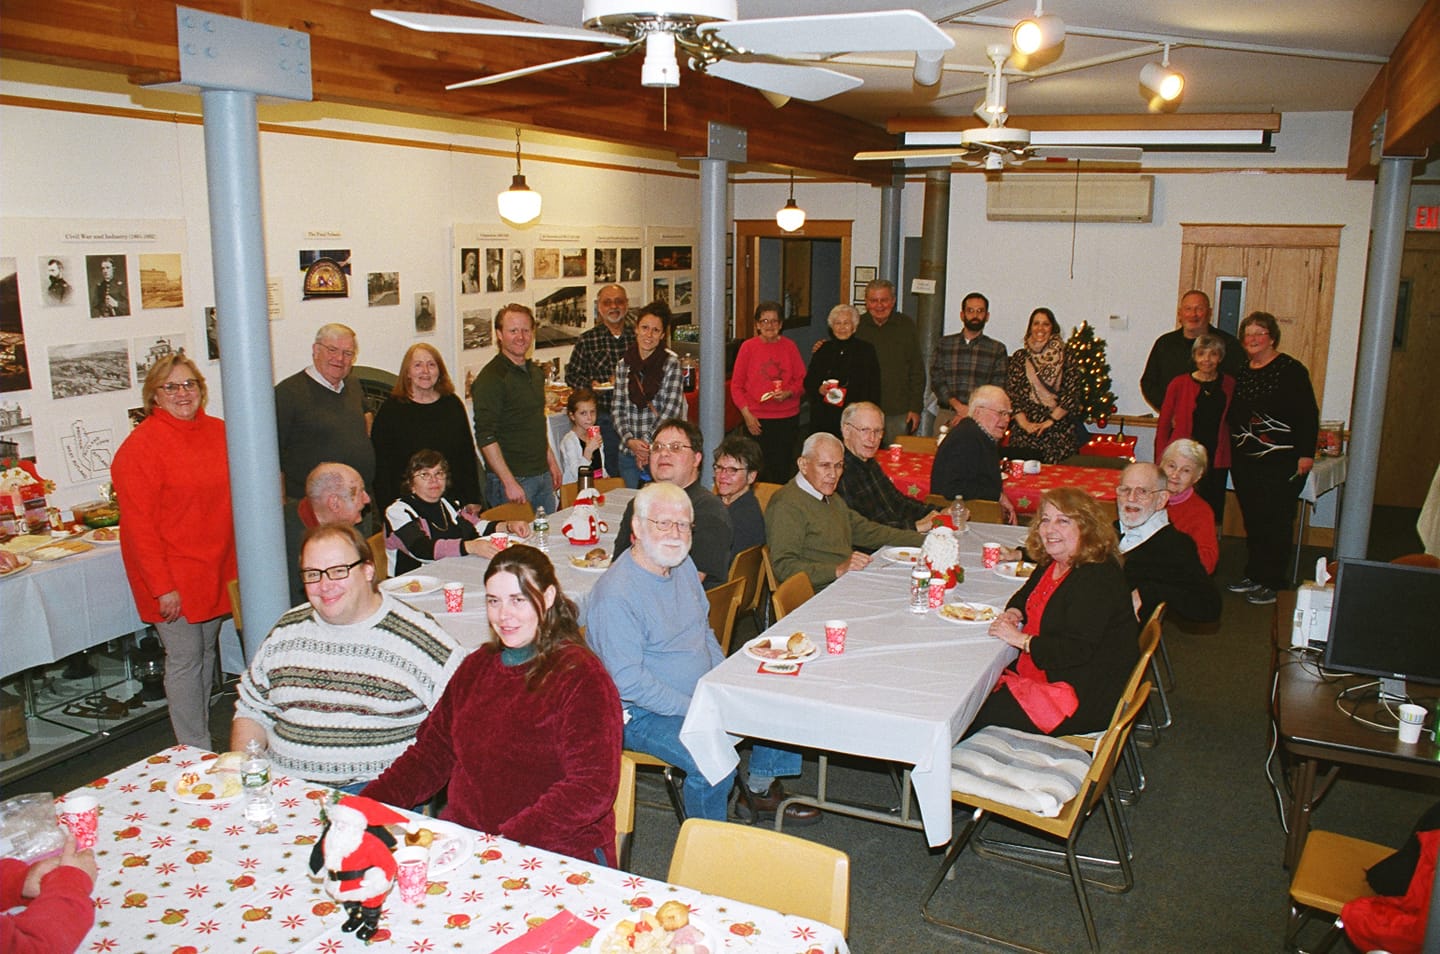 Volunteers gathered for a holiday celbration in December of 2018.